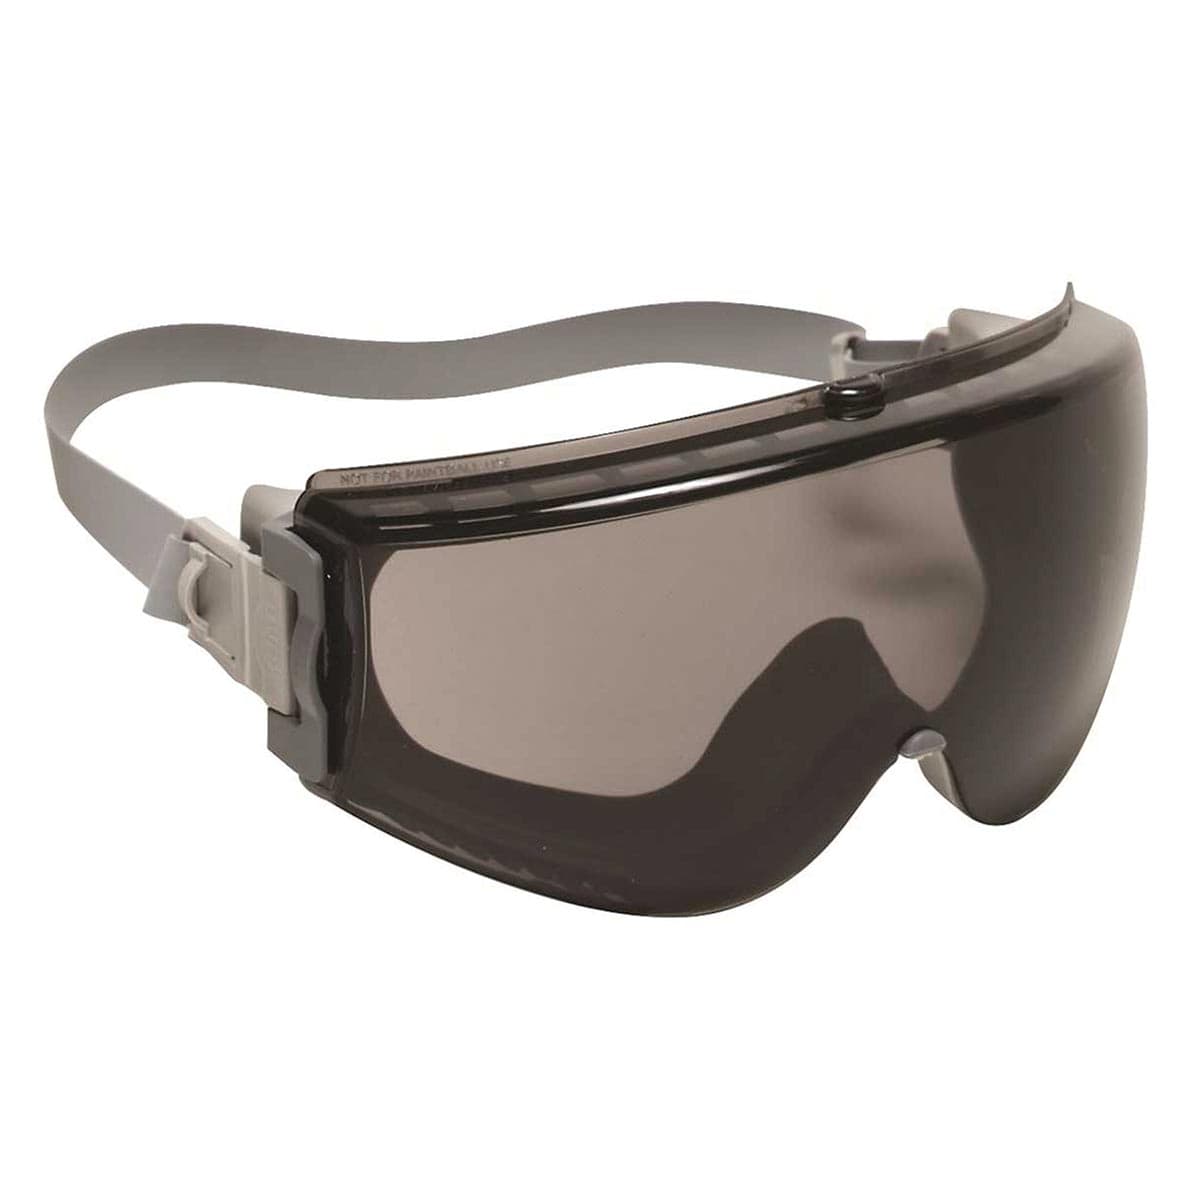 Honeywell Uvex Stealth Safety Goggles